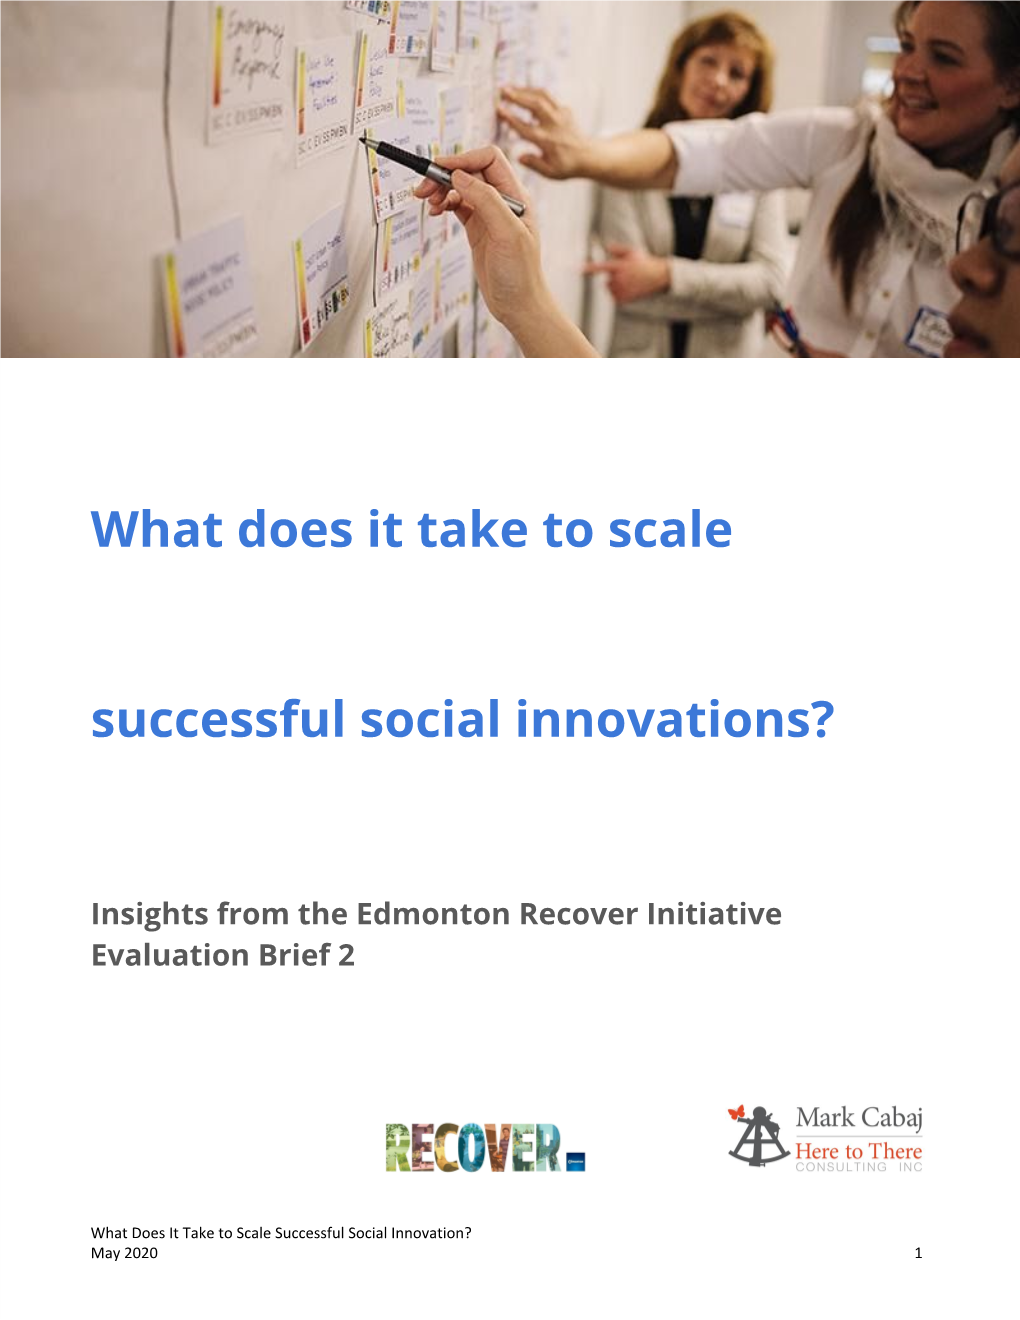 What Does It Take to Scale Successful Social Innovations?